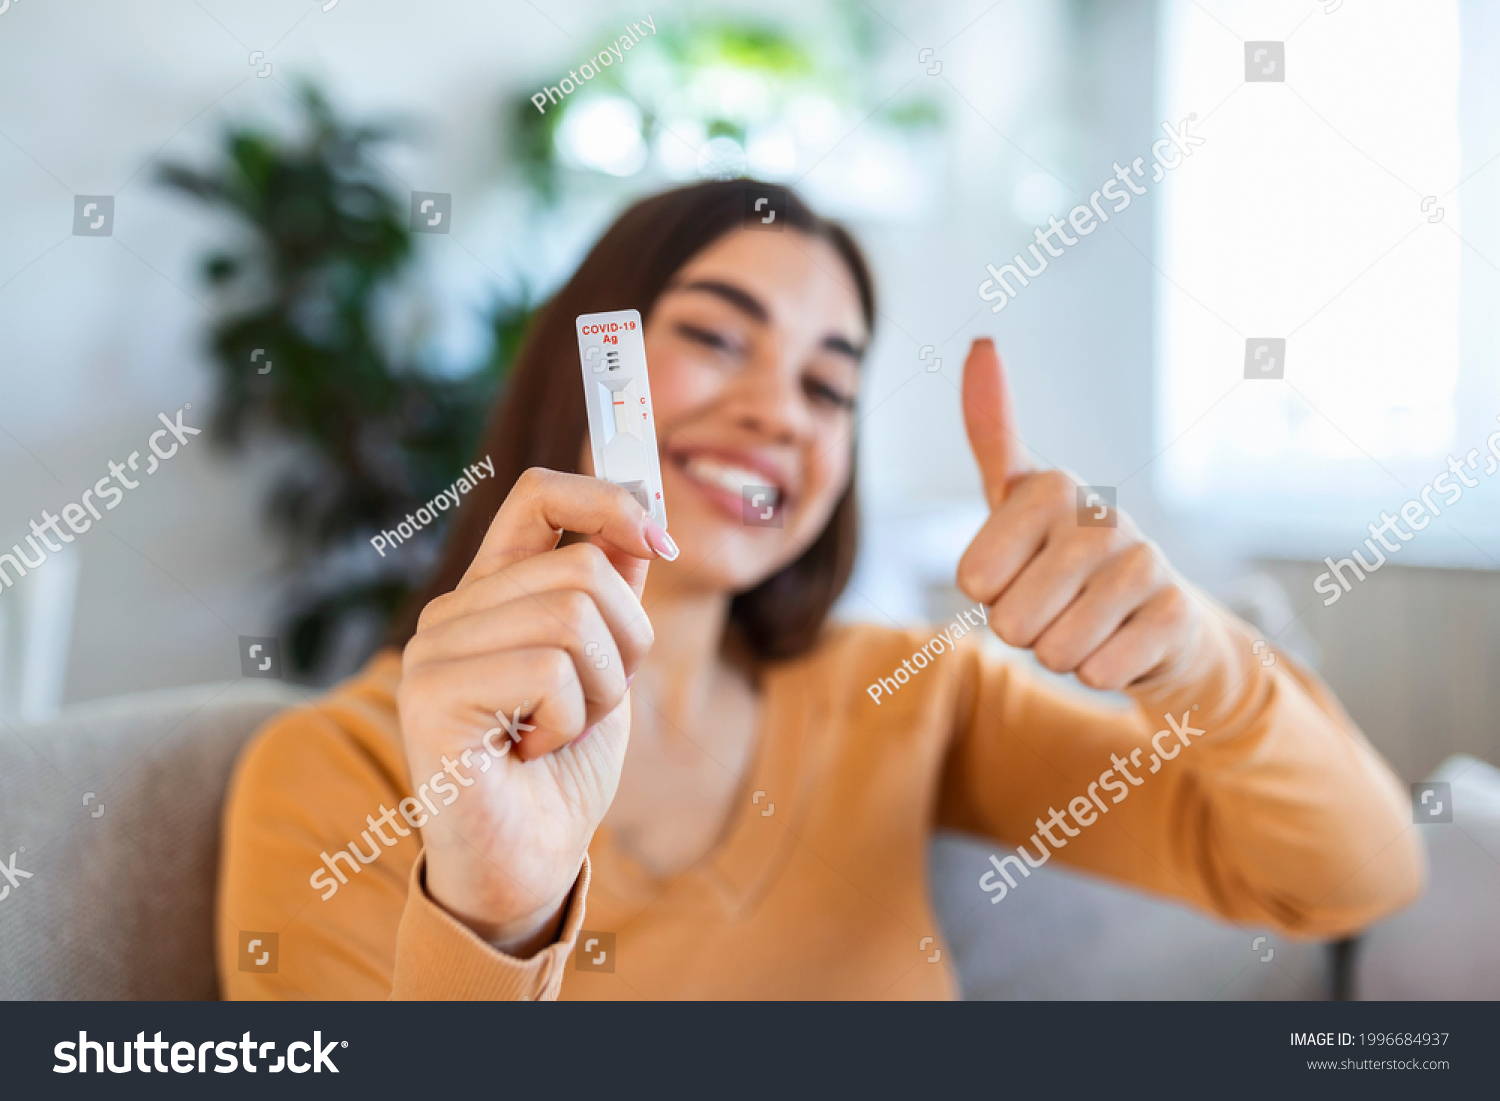 Close-up shot of woman's hand holding a negative test device. Happy young woman showing her negative Coronavirus - Covid-19 rapid test. Focus is on the test.Coronavirus #1996684937